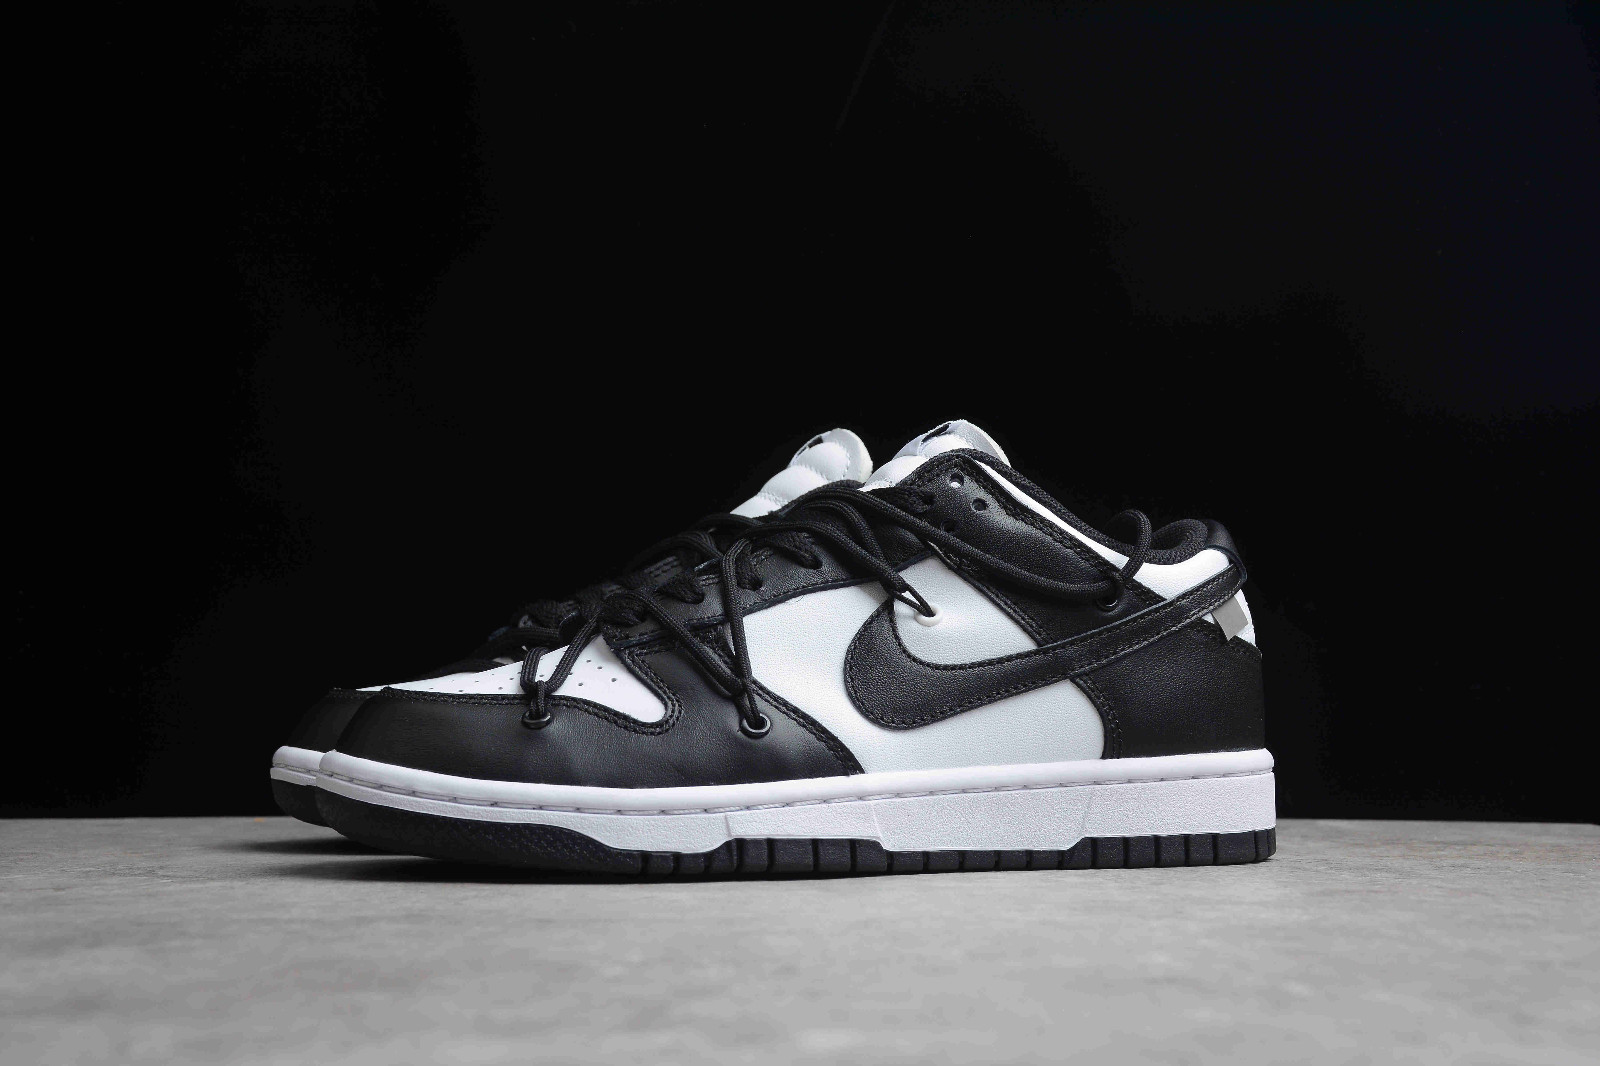 White x Nike Dunk Low LTHR Black White Shoes CT0856 - design your own high heels online for free - GmarShops - 103